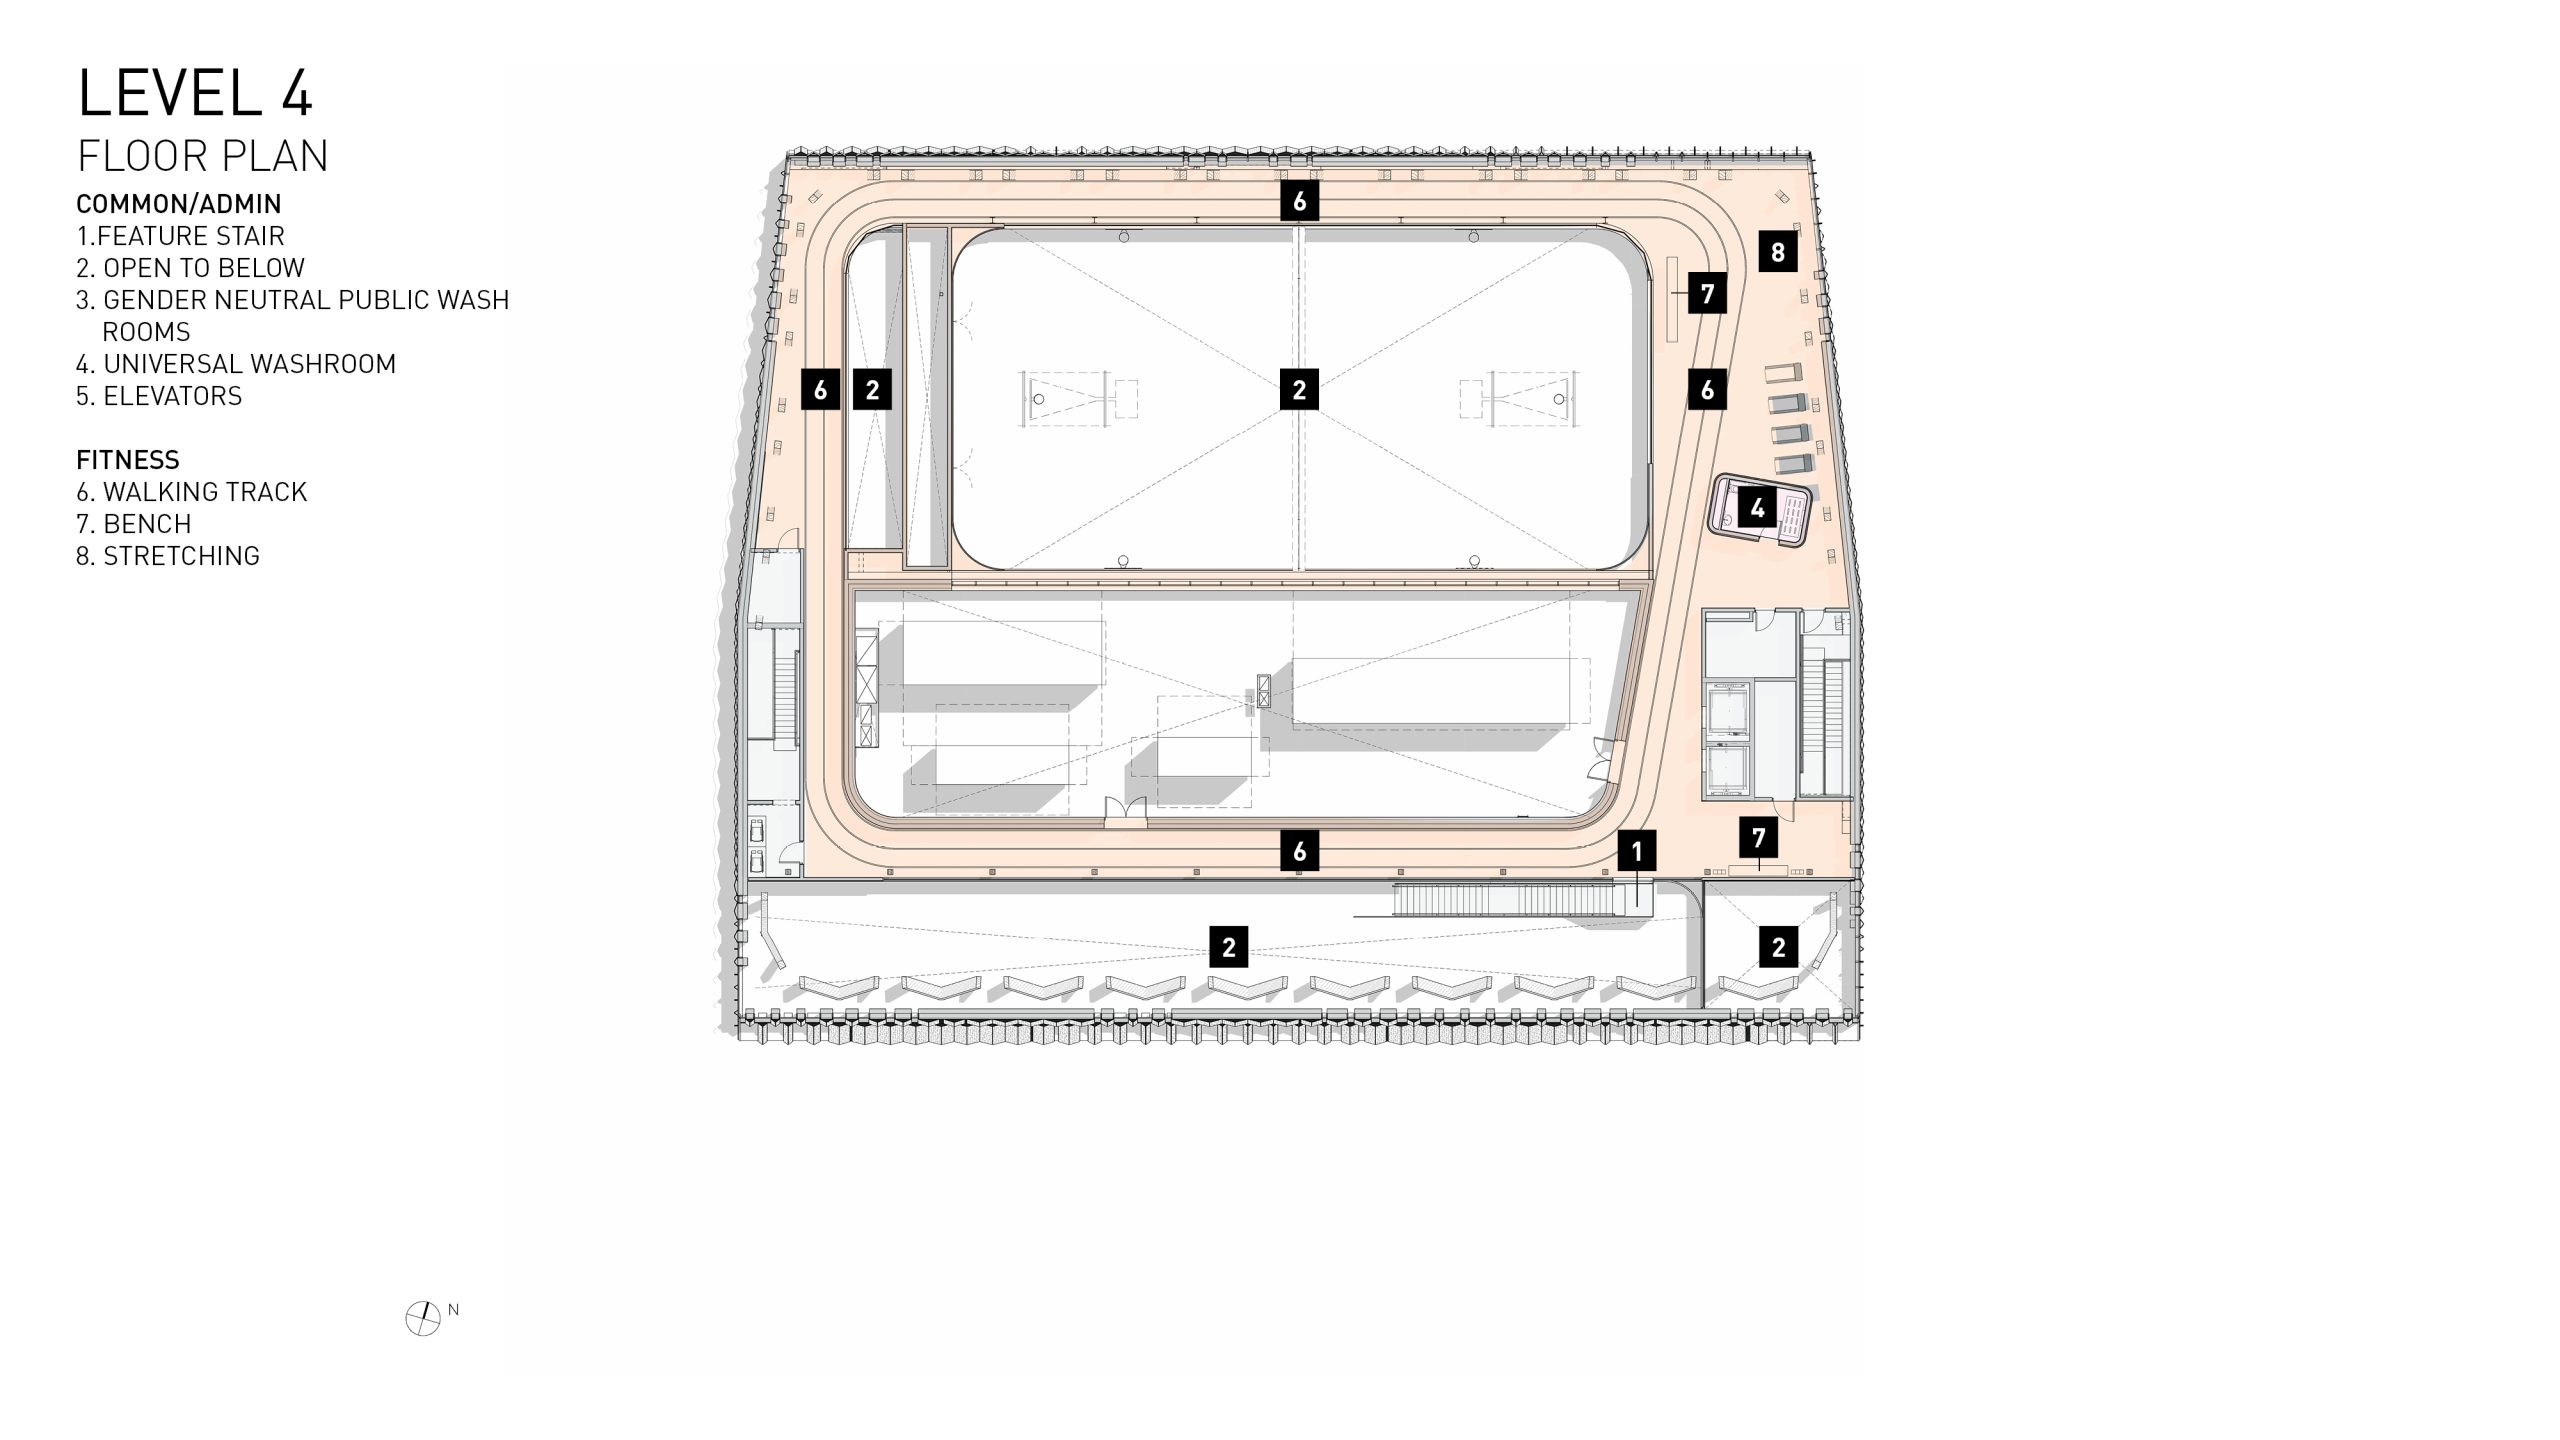 Plan detailing the fourth floor. A walking track with expanded areas for stretching wraps around the building perimeter and provides glazed views into the weight room, gymnasium, atrium, and activity rooms below as well as out to the park and surrounding streets. There is a universal washroom on the east side north of the elevators. Access to a feature stair to the lower levels is located on the south east side in proximity to the elevators.